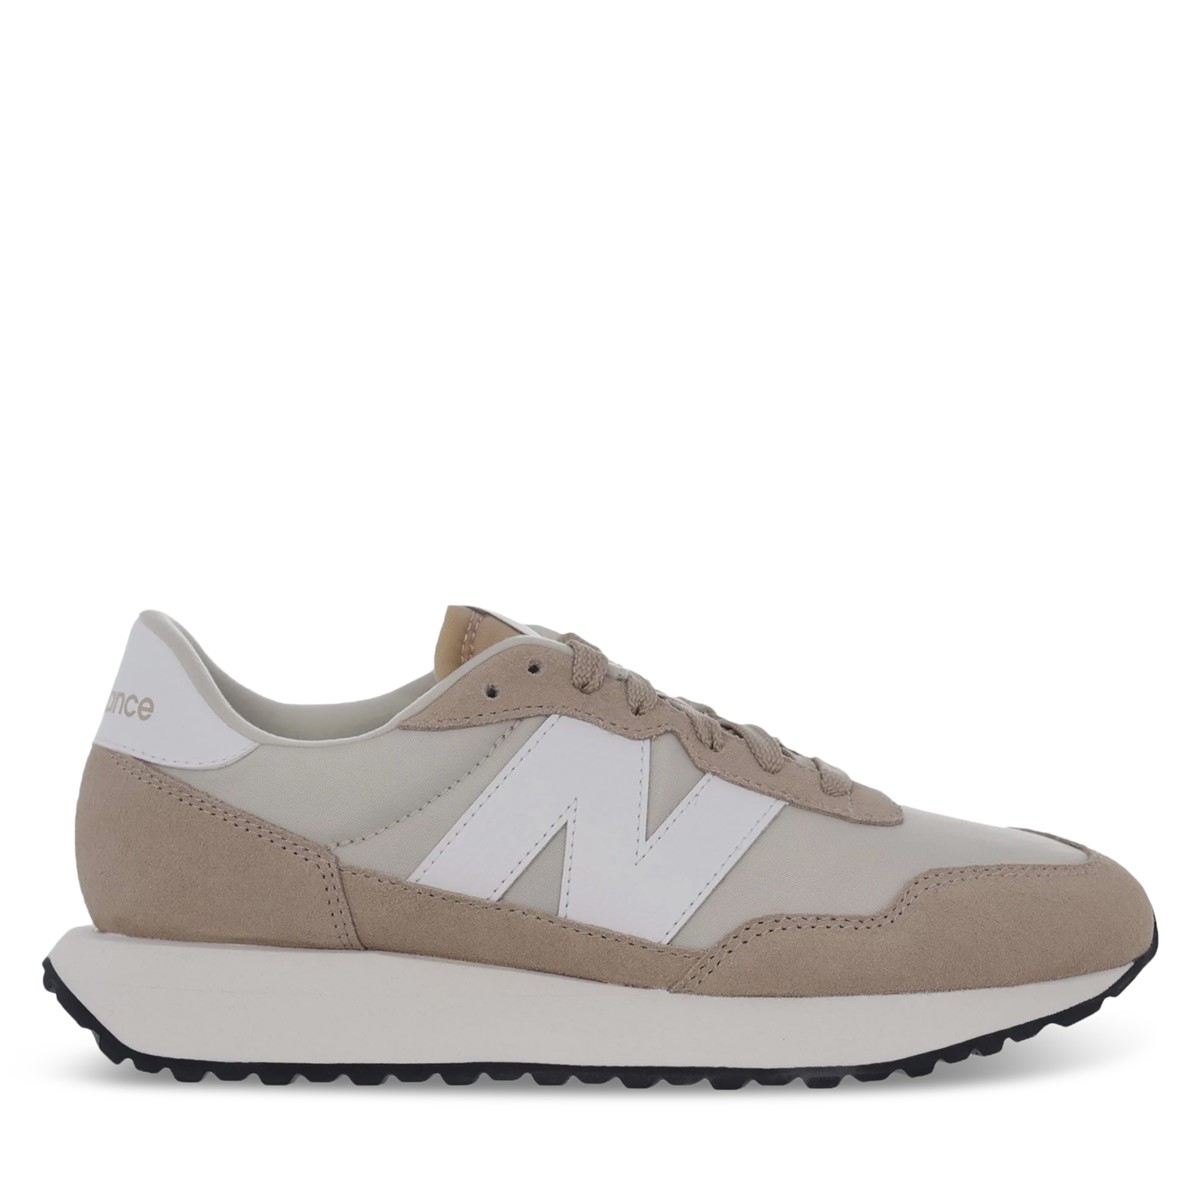 Women's 237 Sneakers in Grey/Taupe